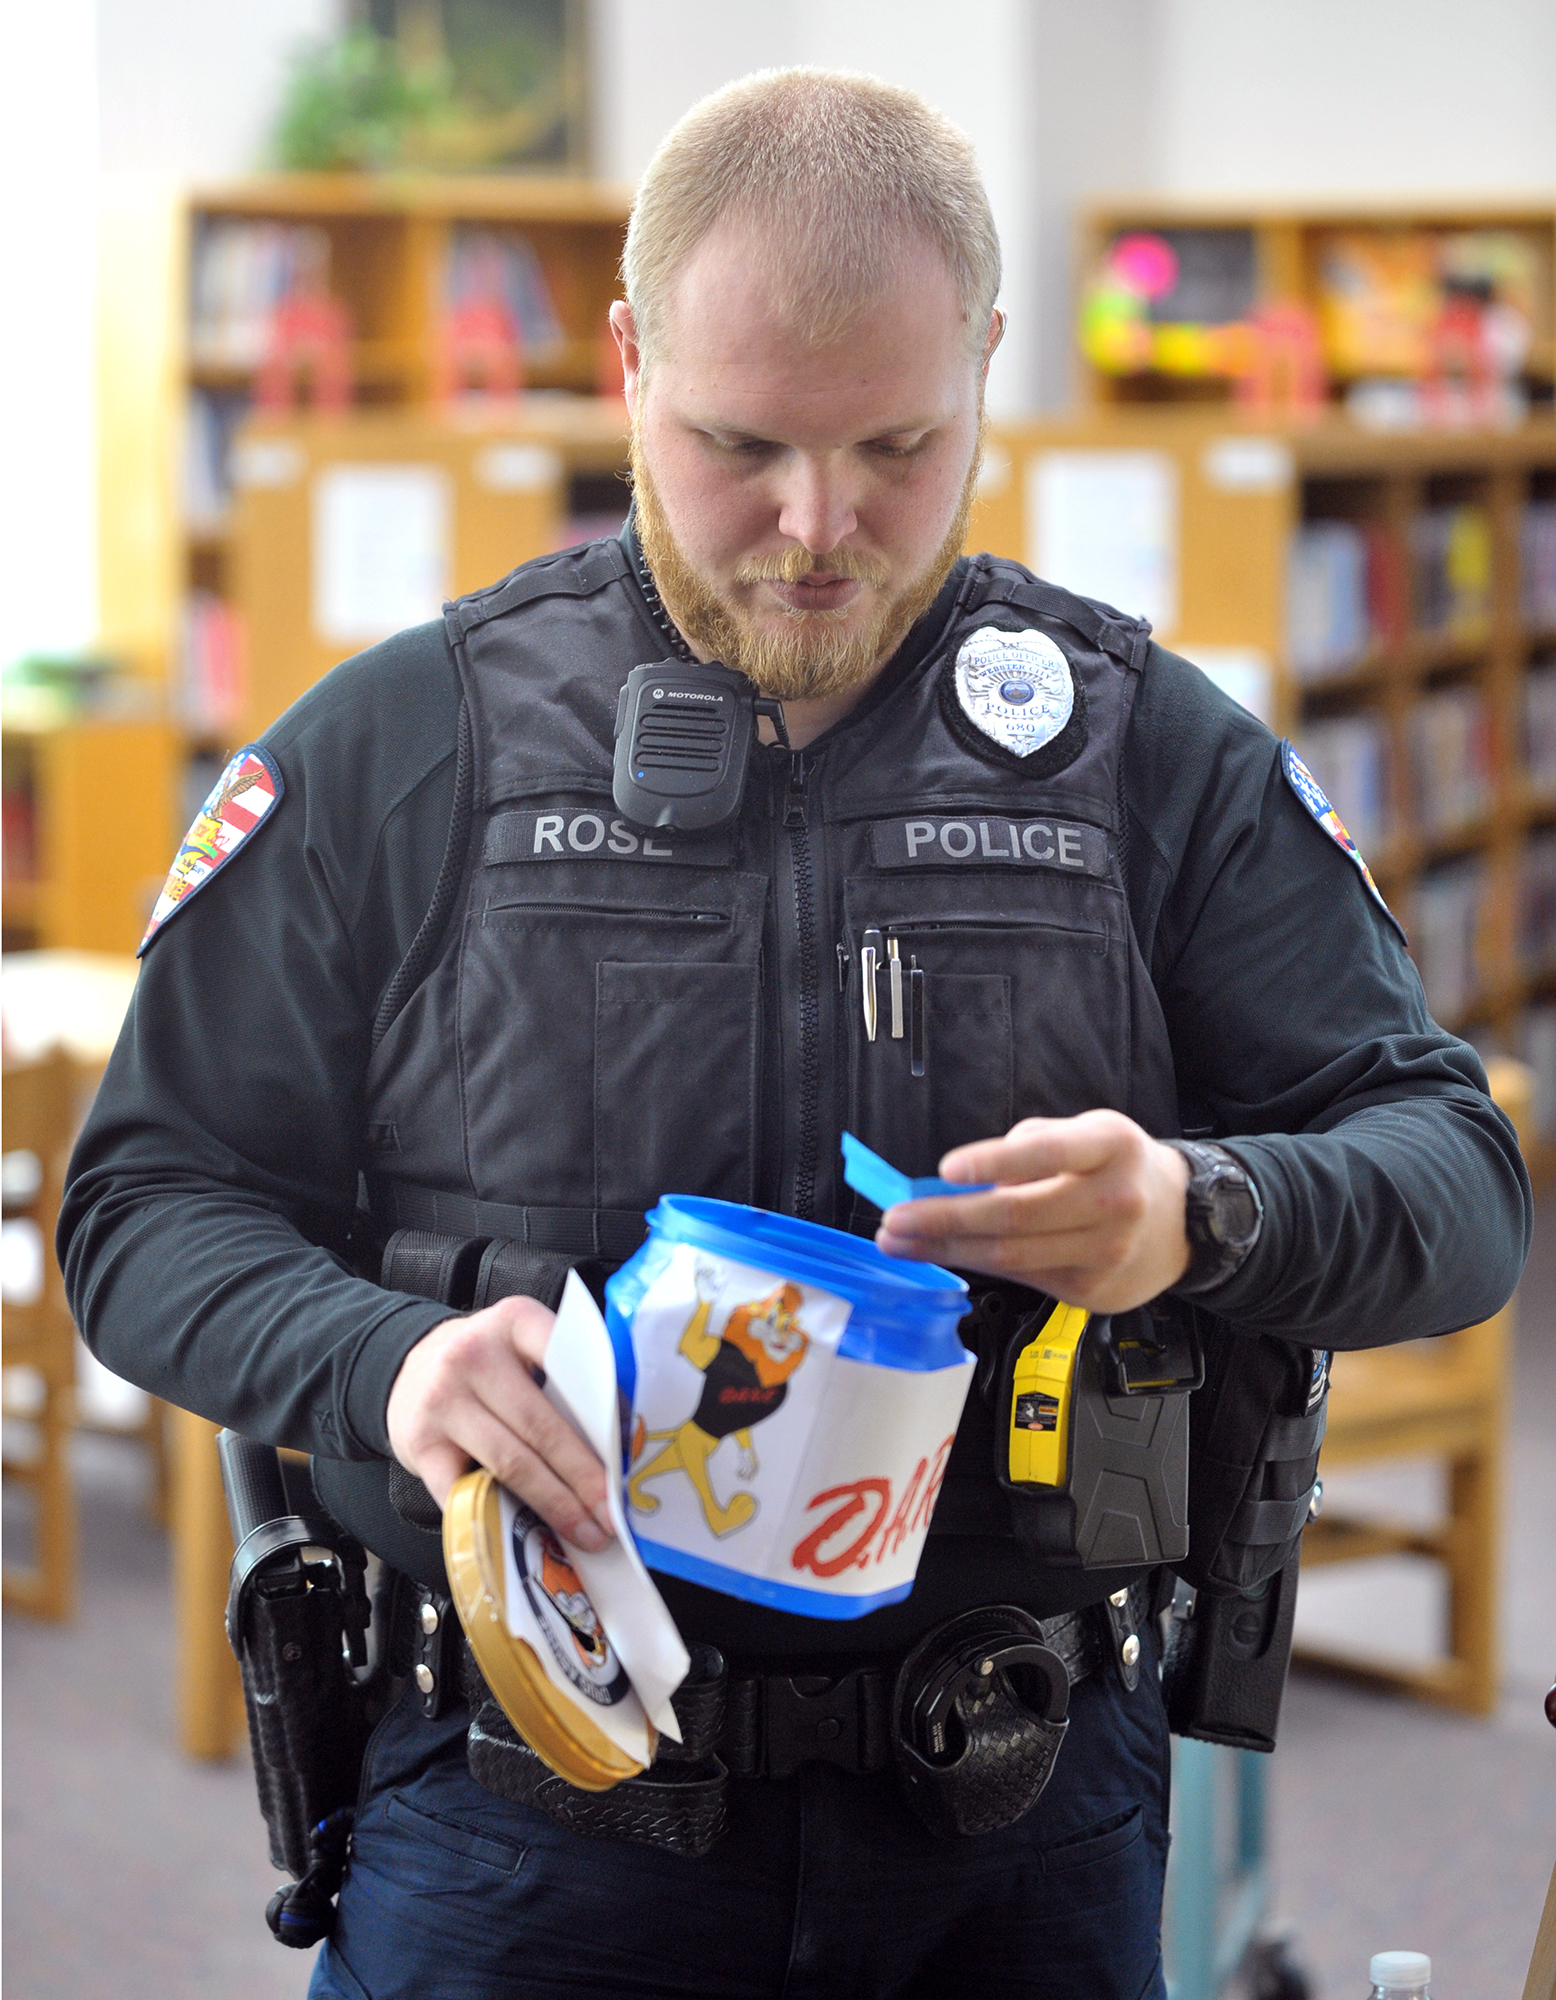 Webster City Police D.A.R.E Officer Dylan Rose checks the question box during a recent class at the Webster City Middle School